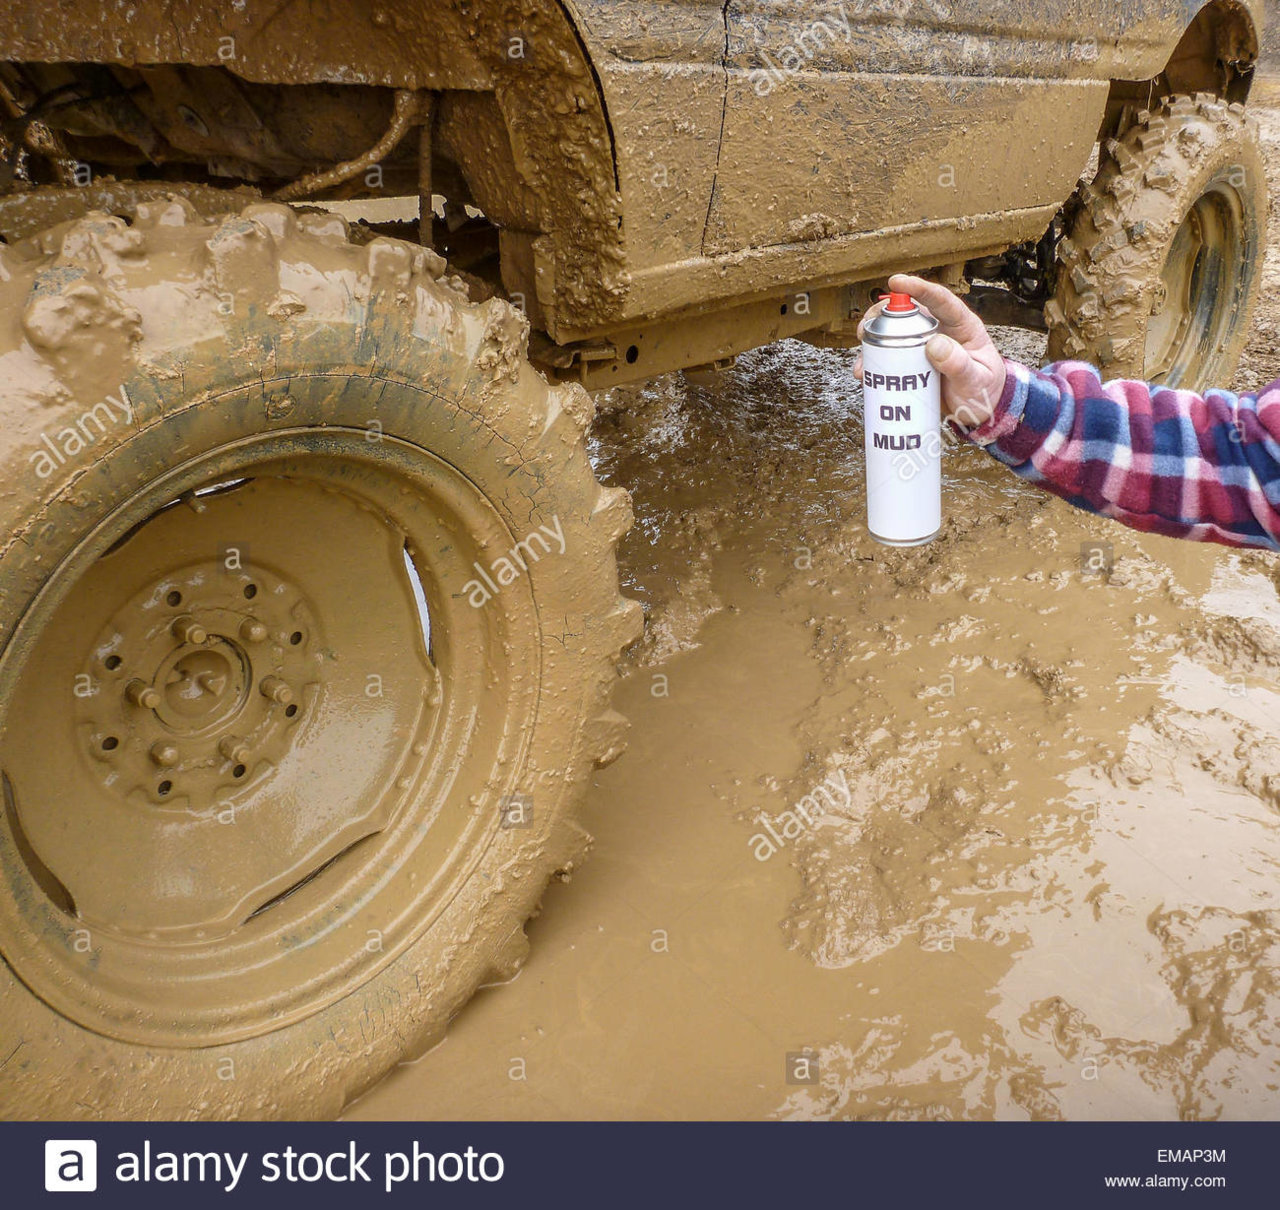 aerosol-spray-on-mud-next-to-an-off-road-suv-vehicle-covered-in-mud-EMAP3M.jpg